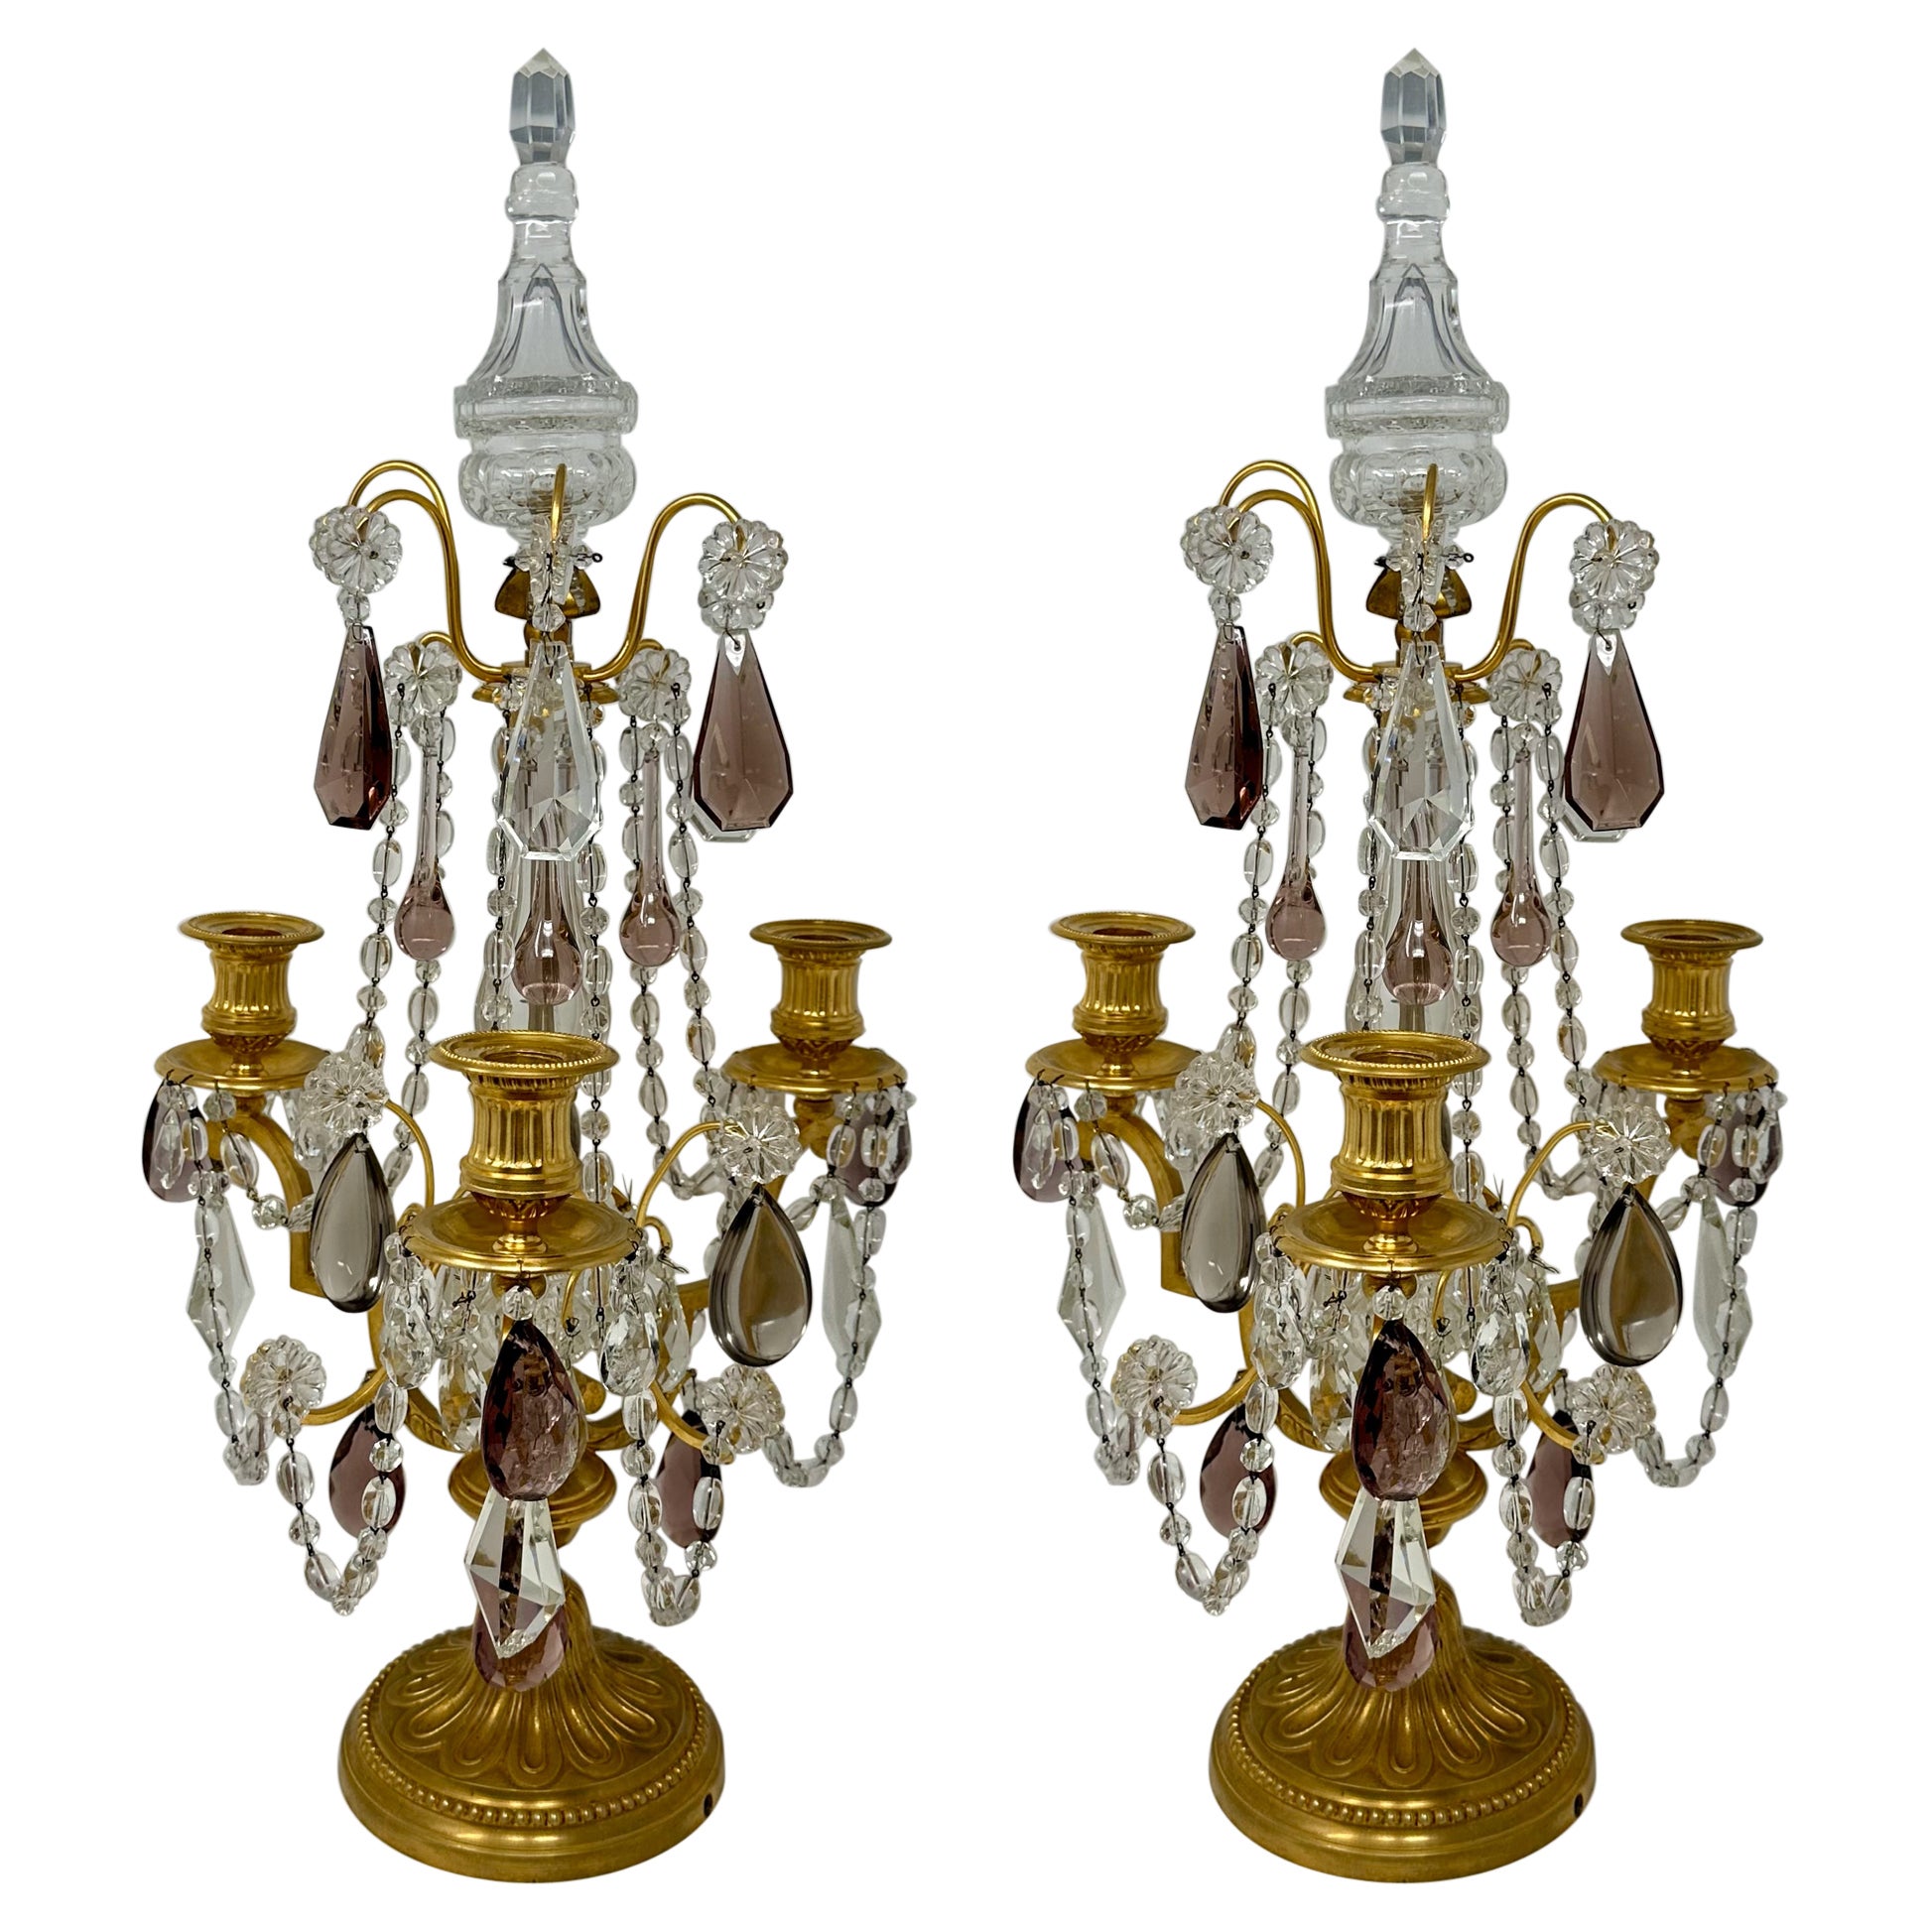 Pair Antique French Cut Crystal and Bronze D'Ore Girondoles, Circa 1890.